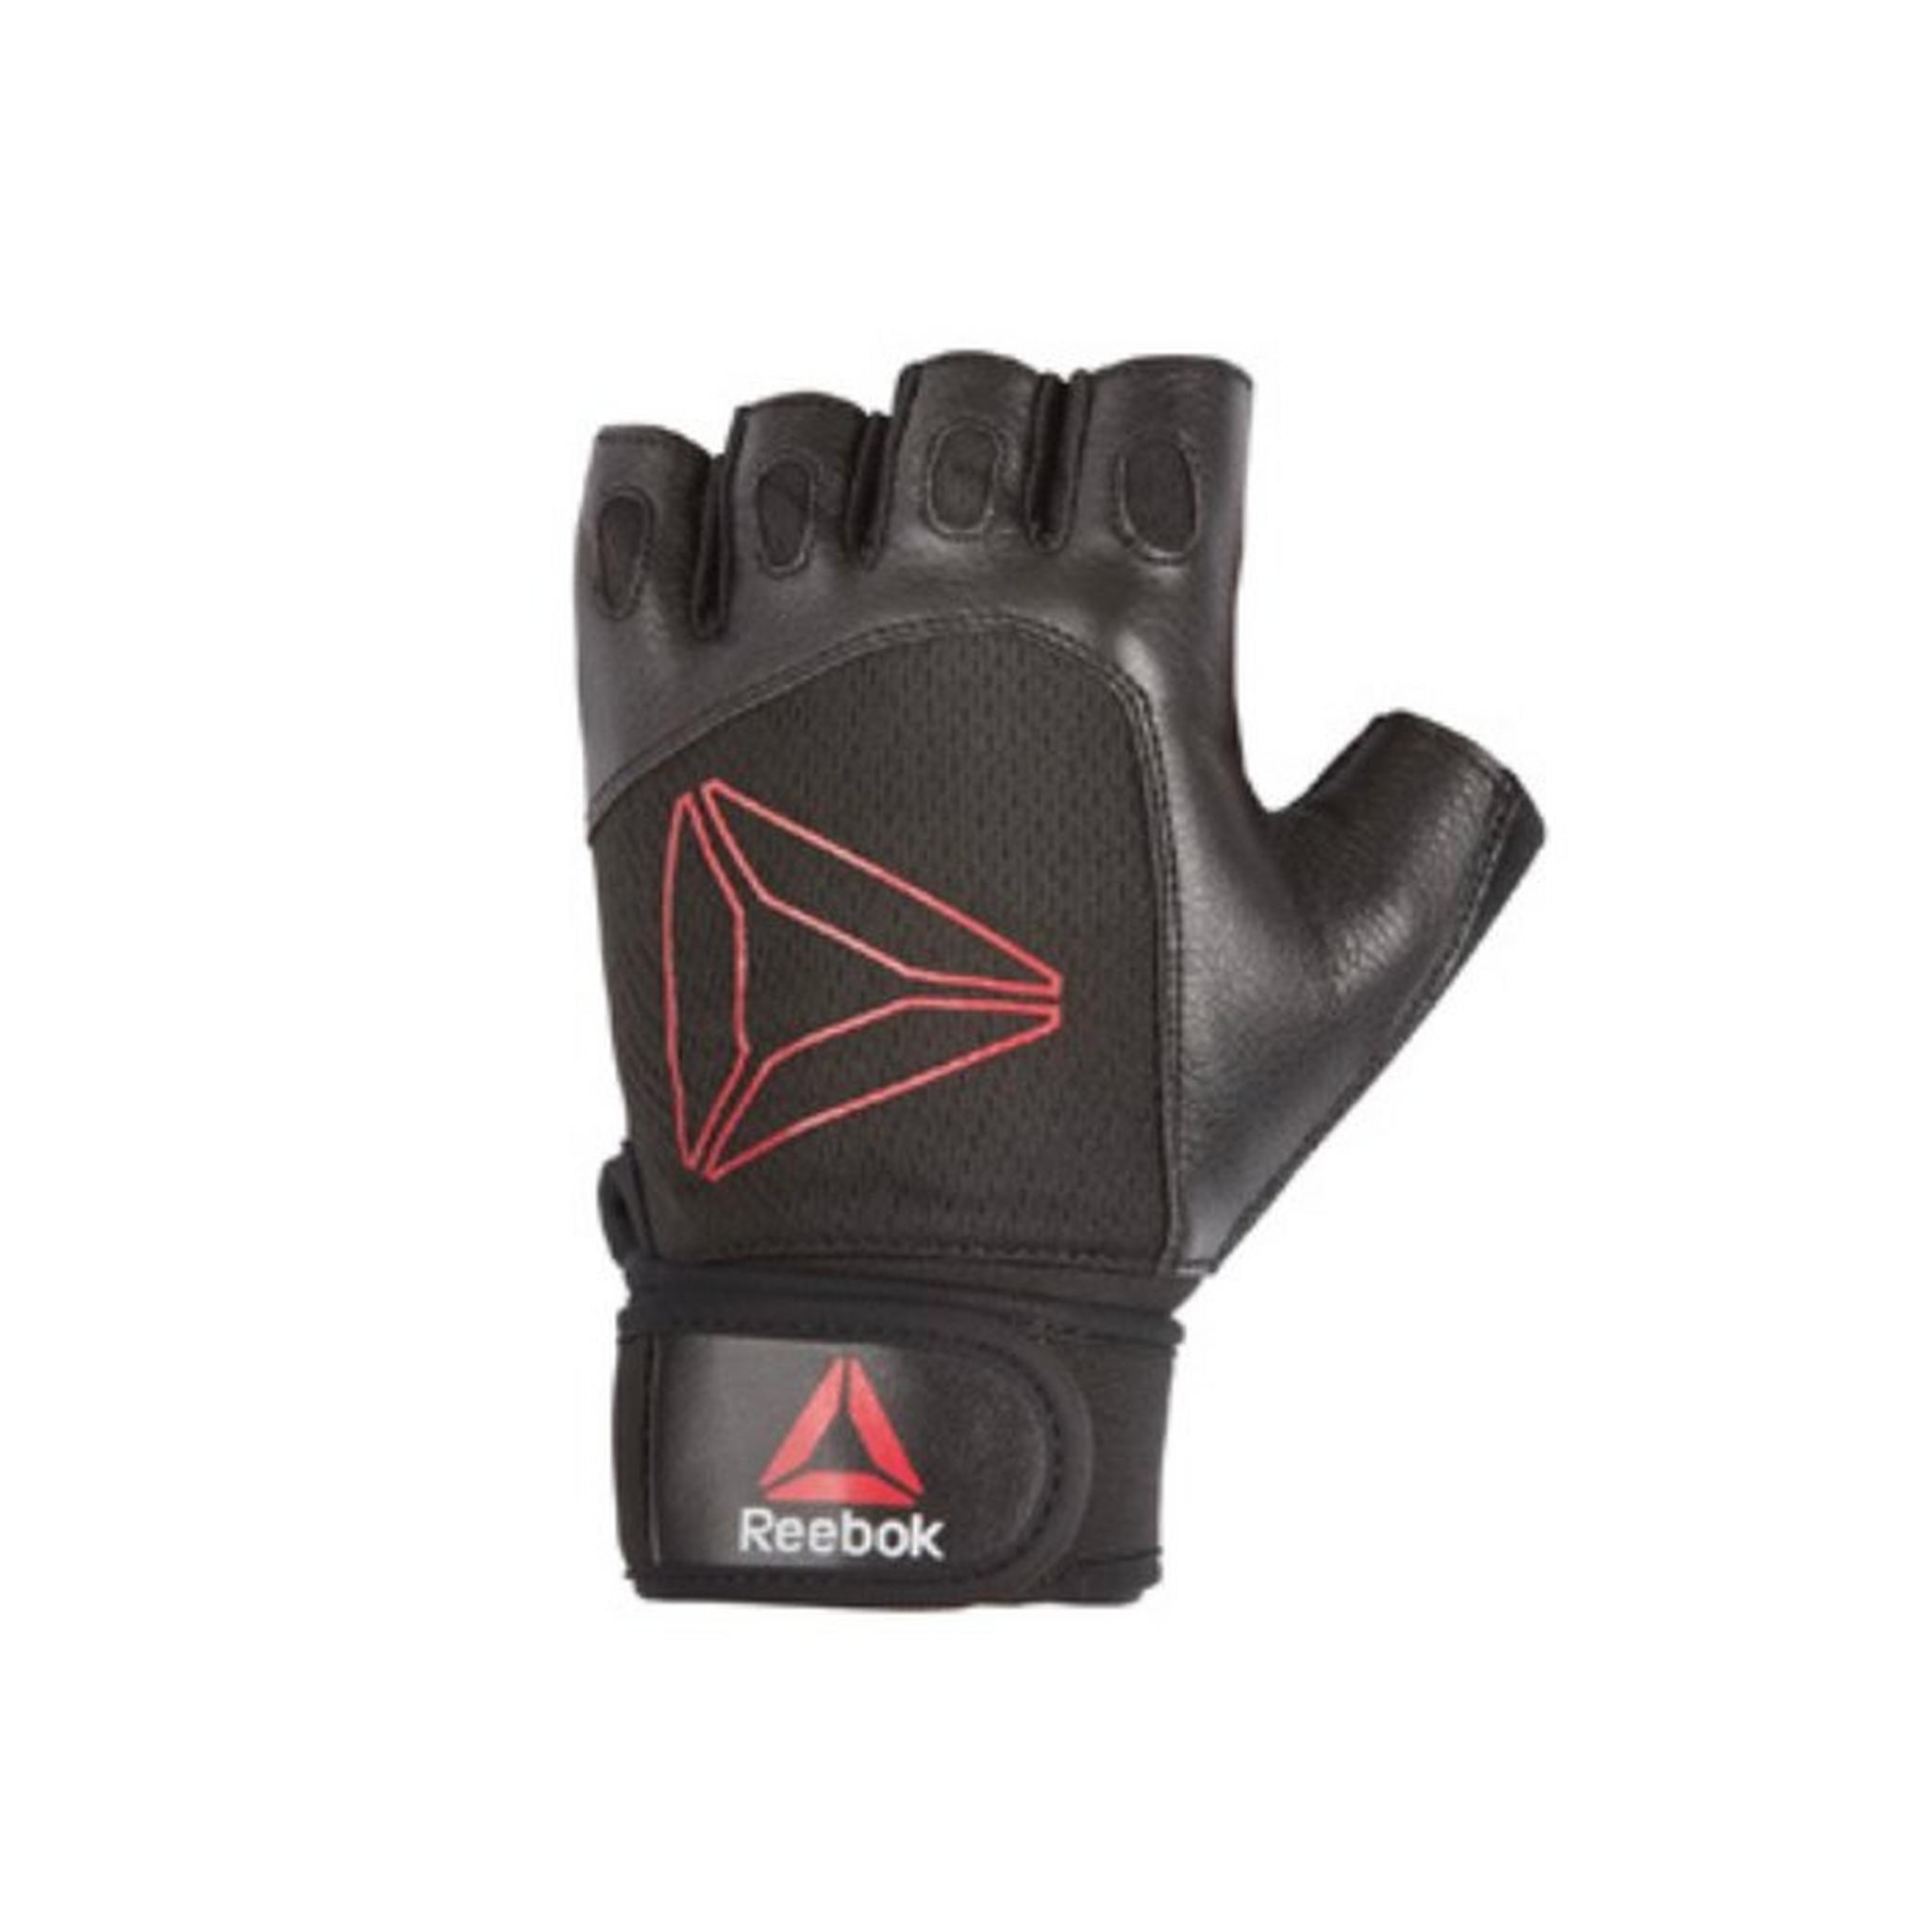 Reebok Lifting Gloves, RAGB-15613 - Black and Red - Small